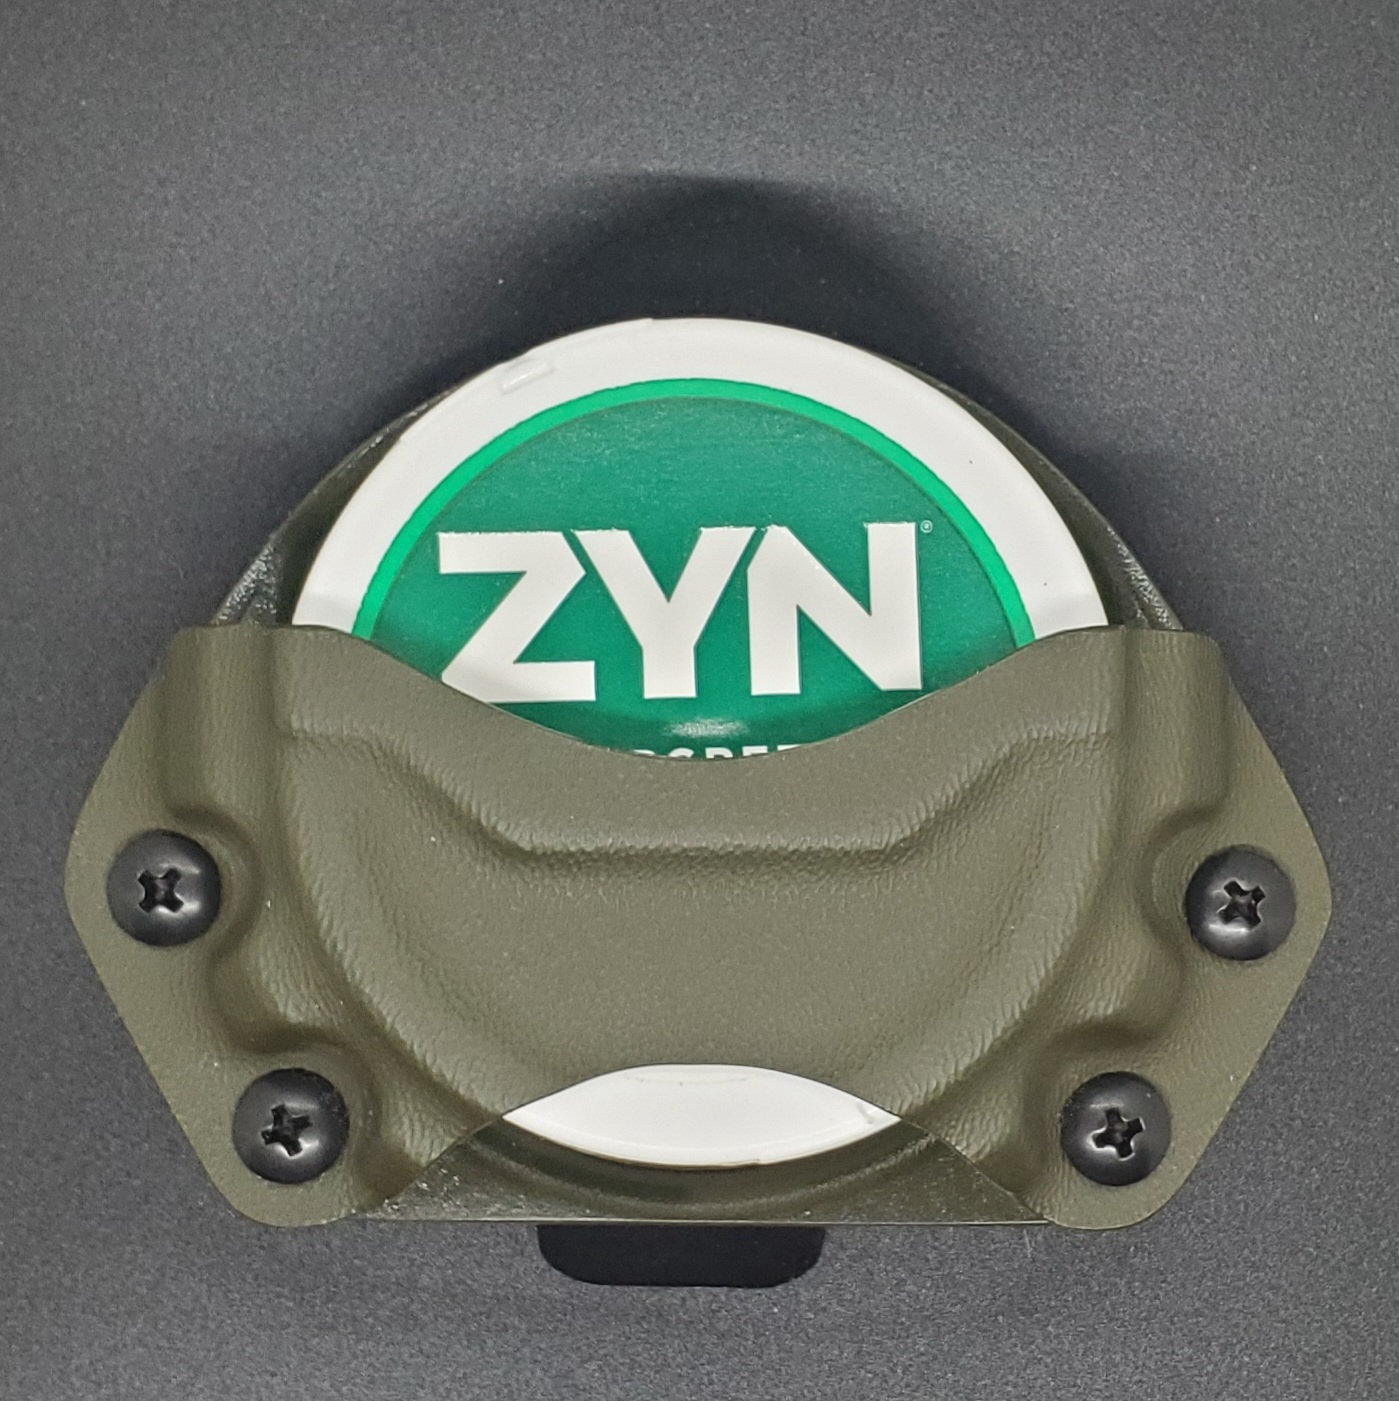 Zyn Dip Can Holders coming real soon to the website www.Armeddefenseho, Lobster